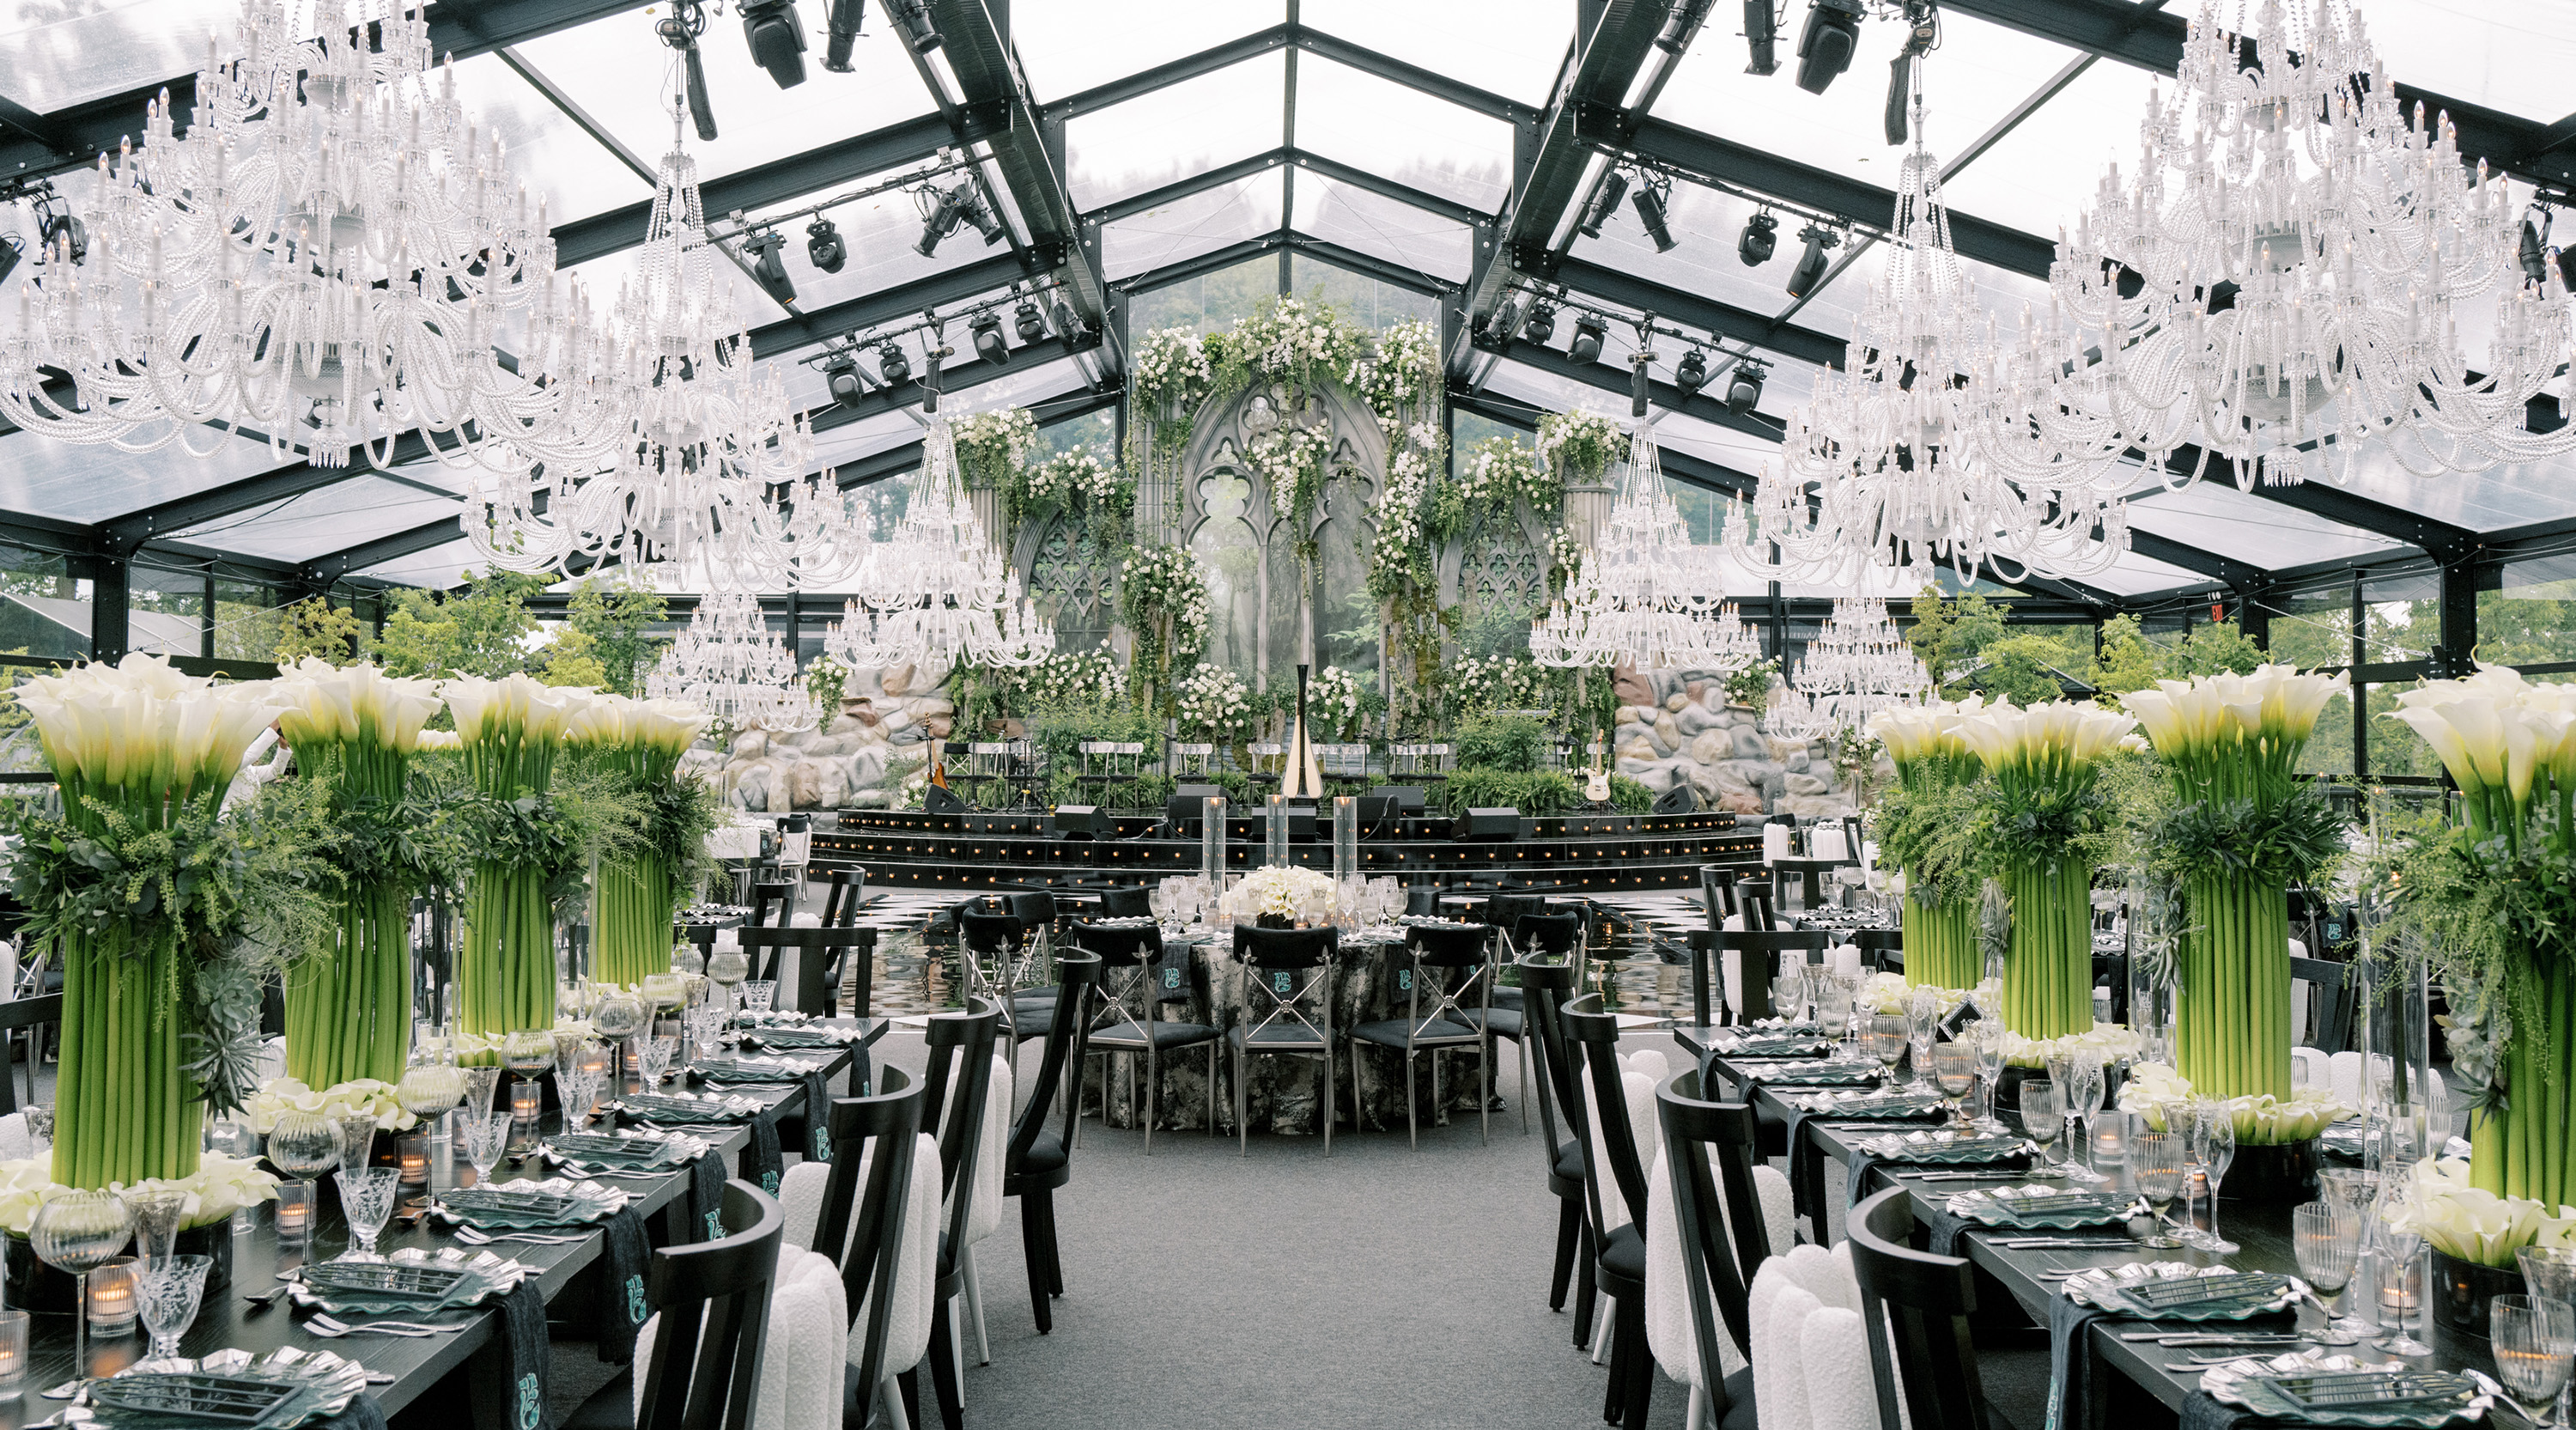 Green and white florals, crystal chandeliers, and black seating and accents enhance the decor of a glass tent set for a wedding dinner gala